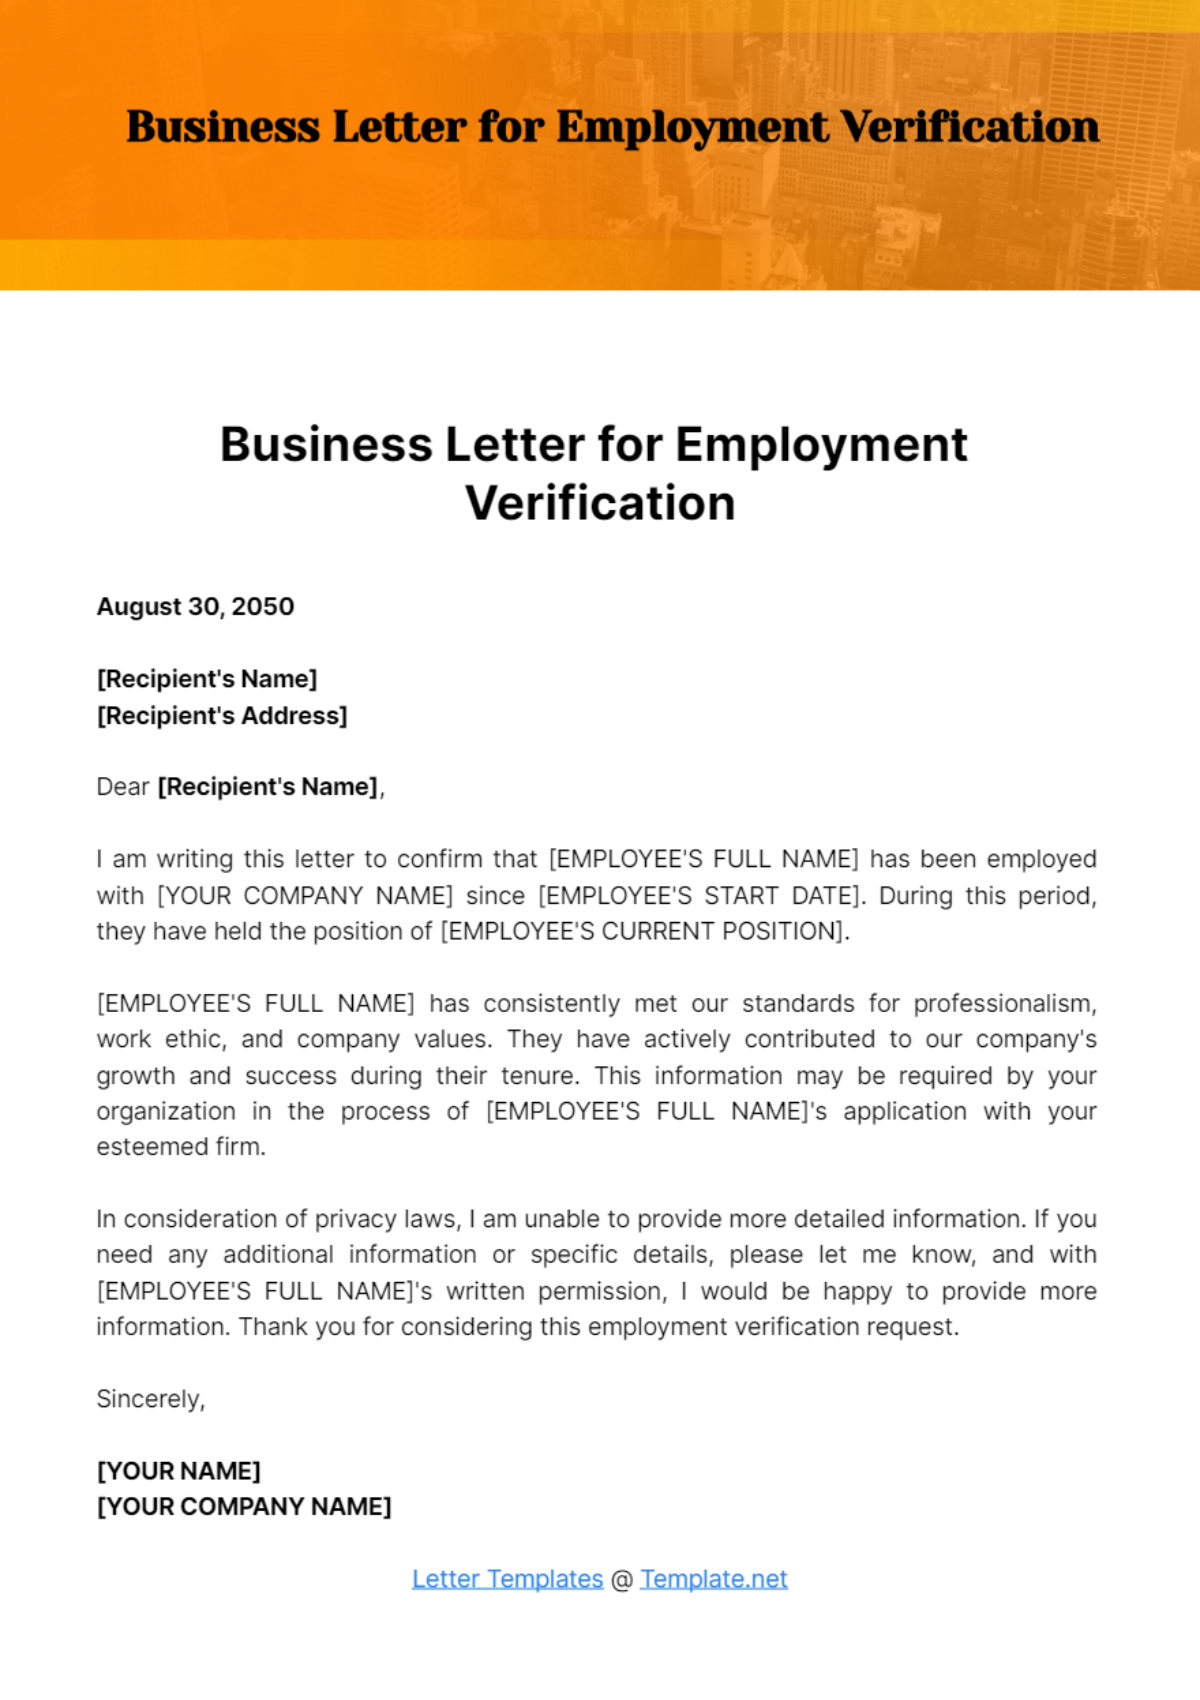 Free Business Letter for Employment Verification Template